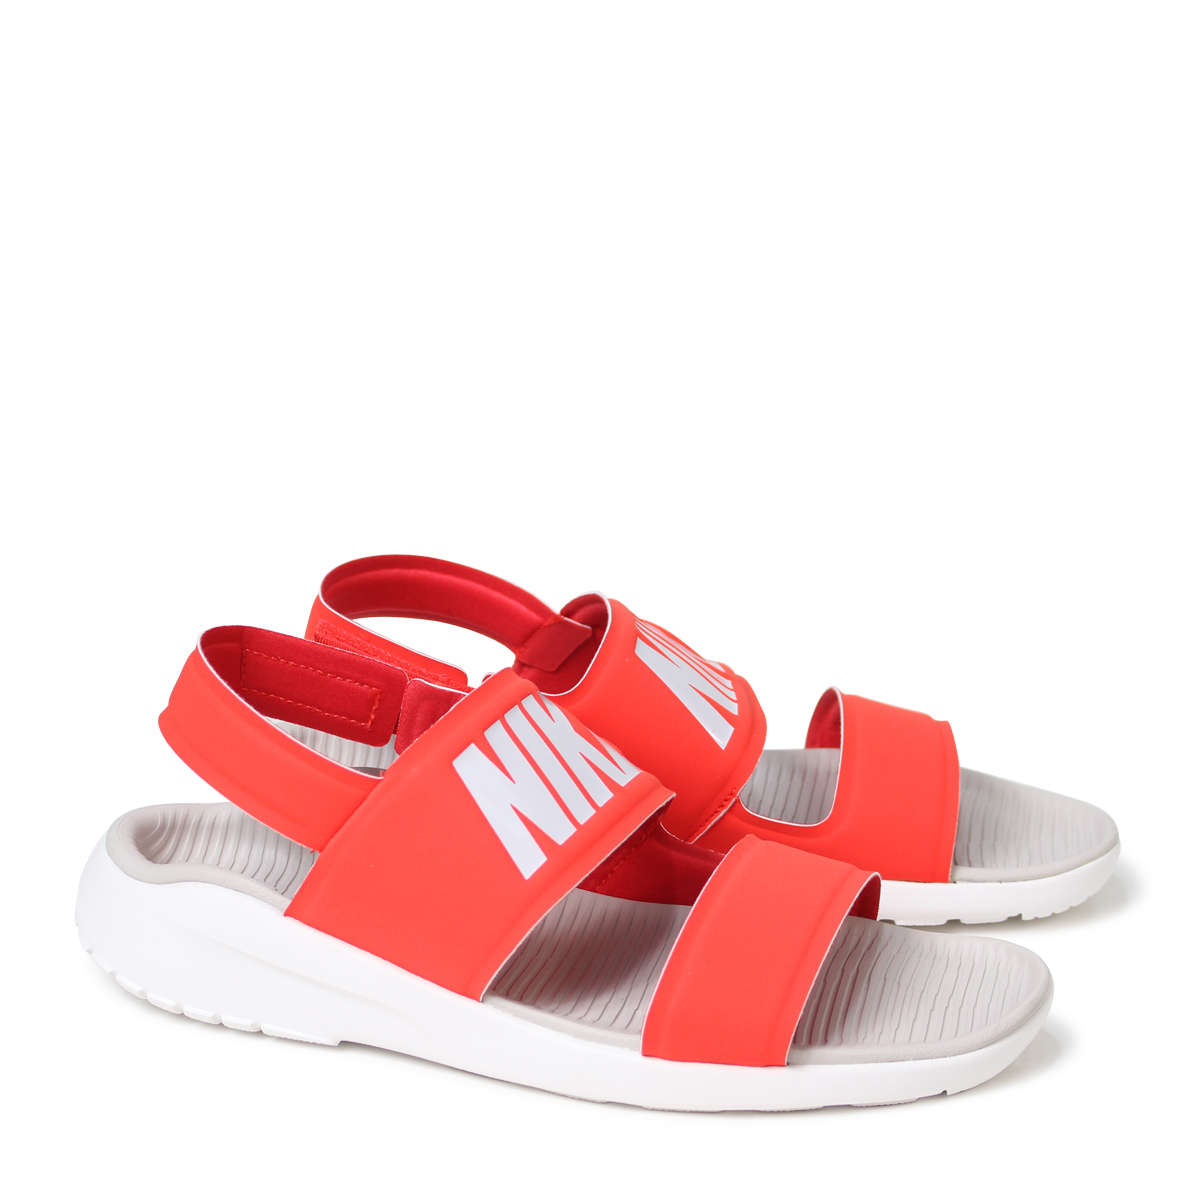 mens nike sandals with backstrap